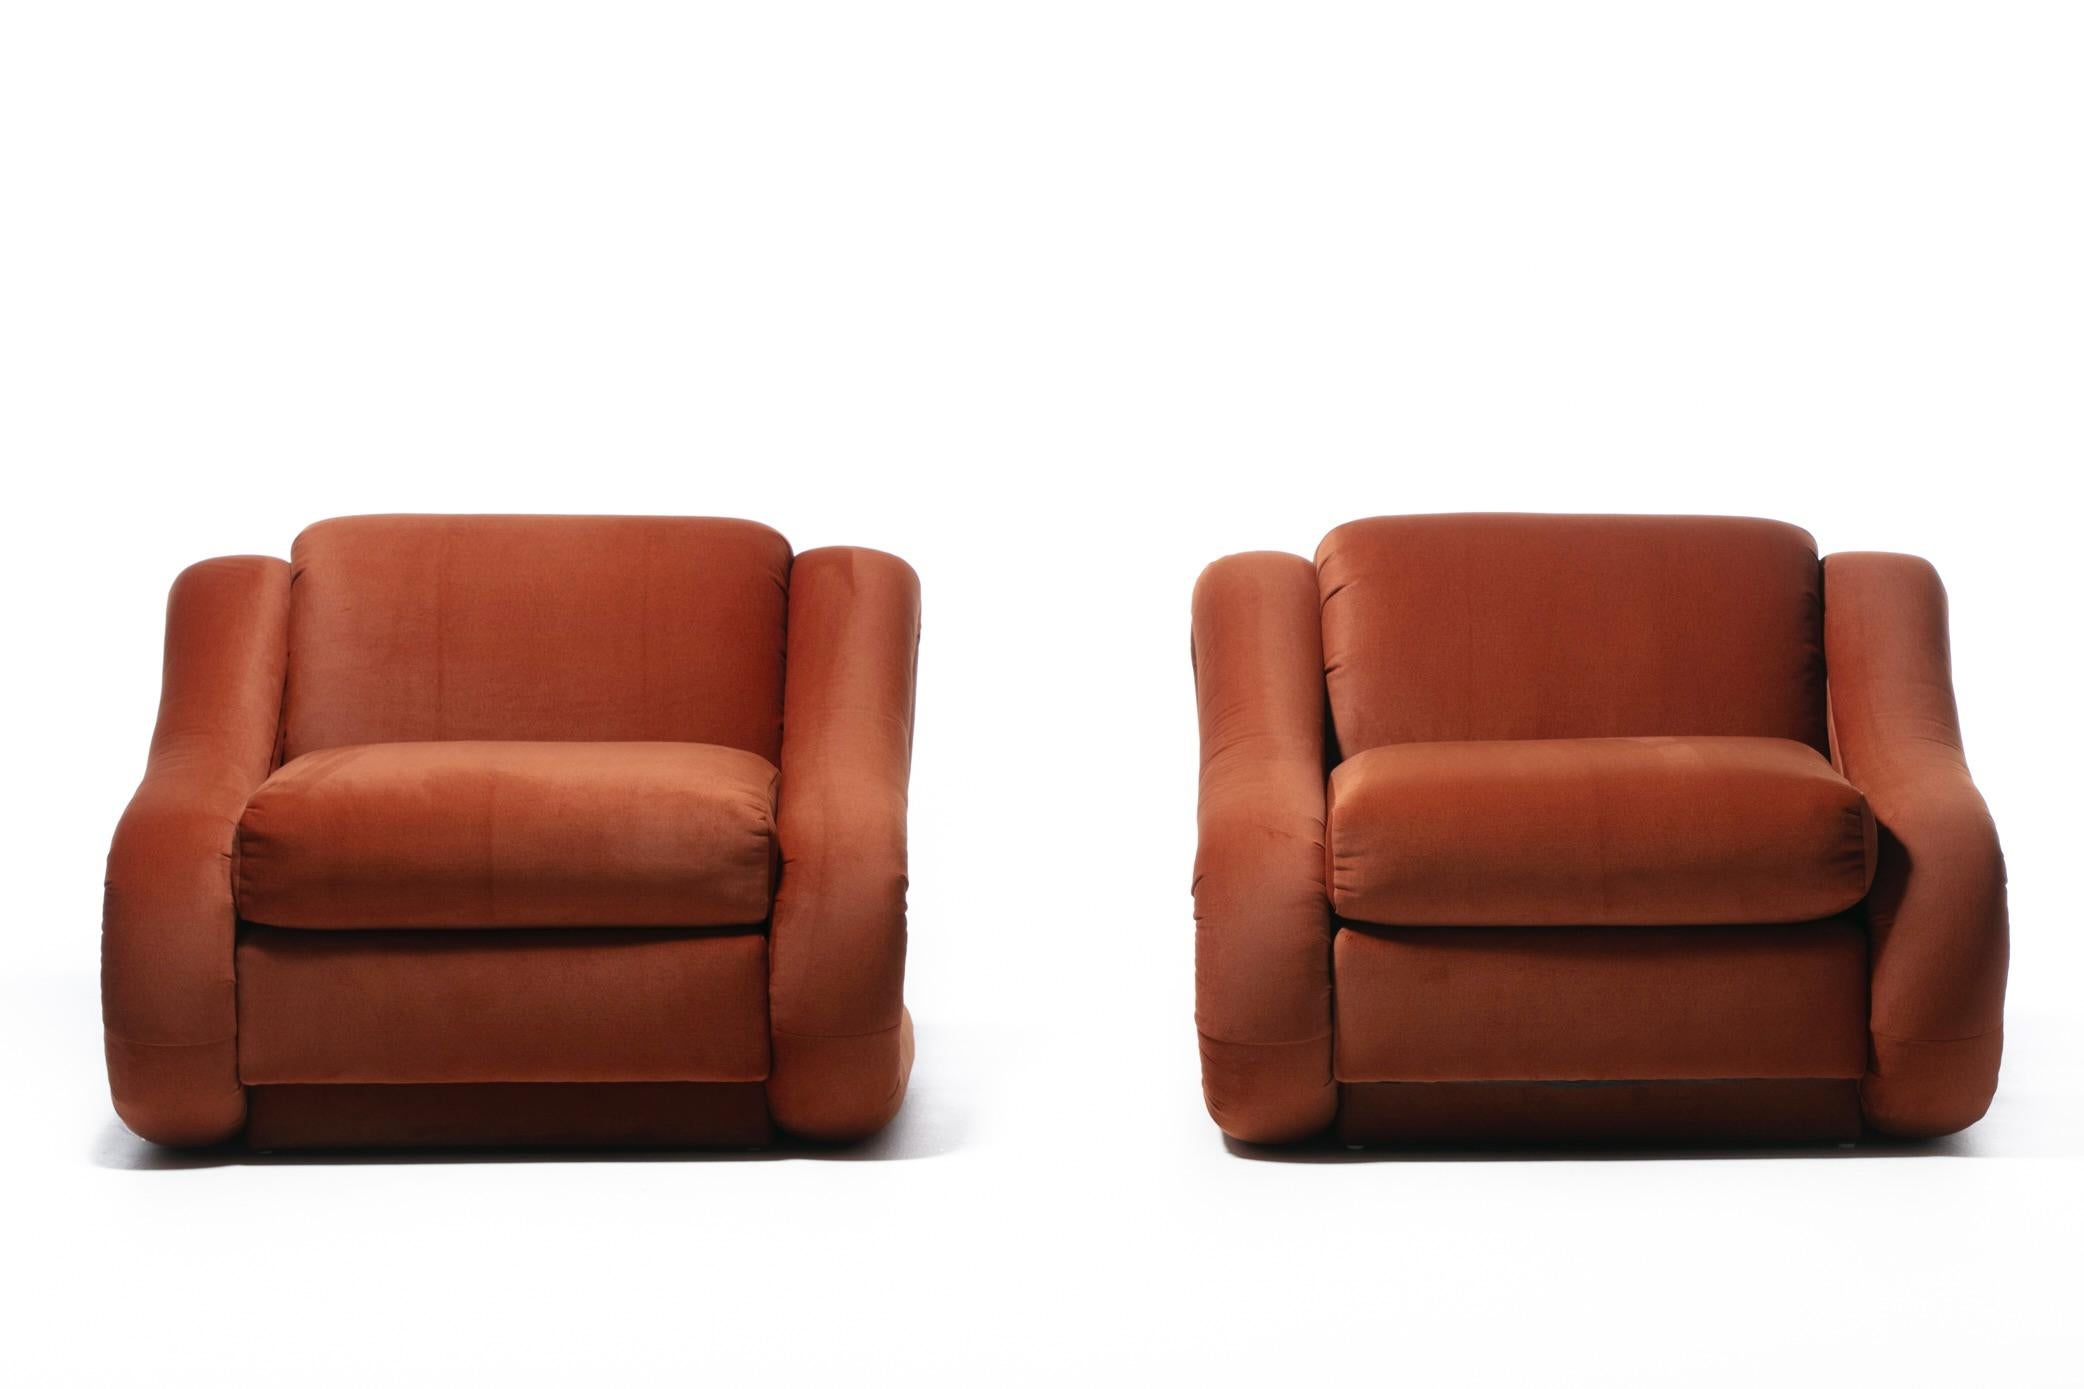 American Monumental Post Modern Pair of Weiman Lounge Chairs in Marmalade Orange Fabric For Sale